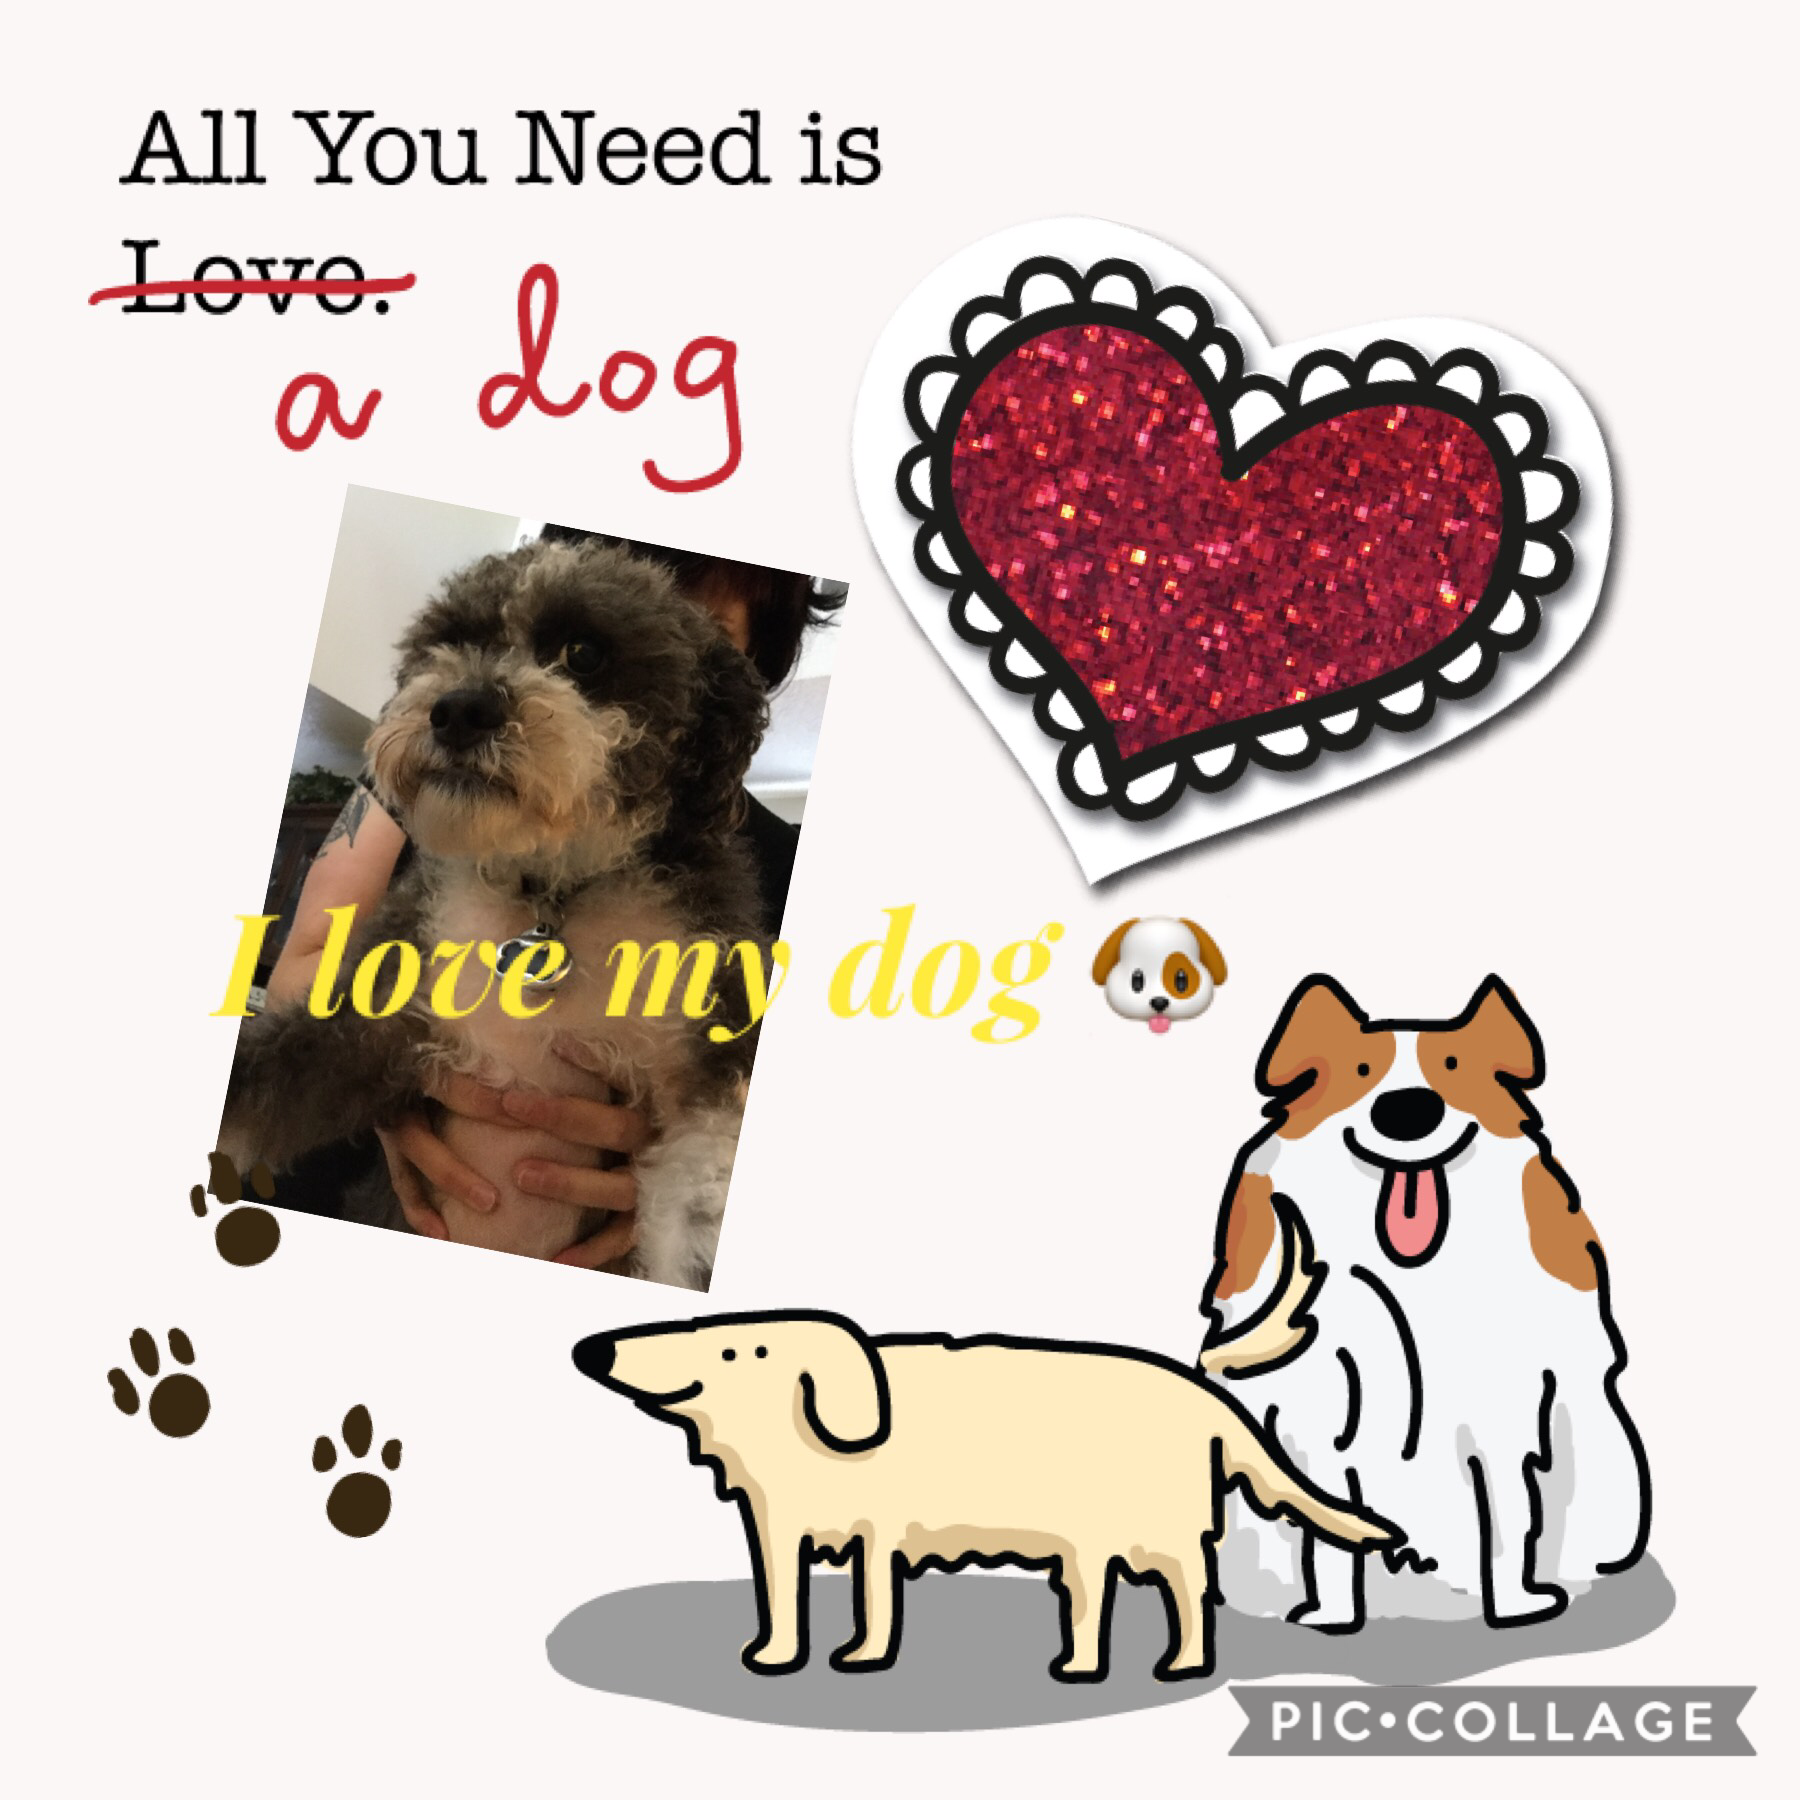 All you need is a dog